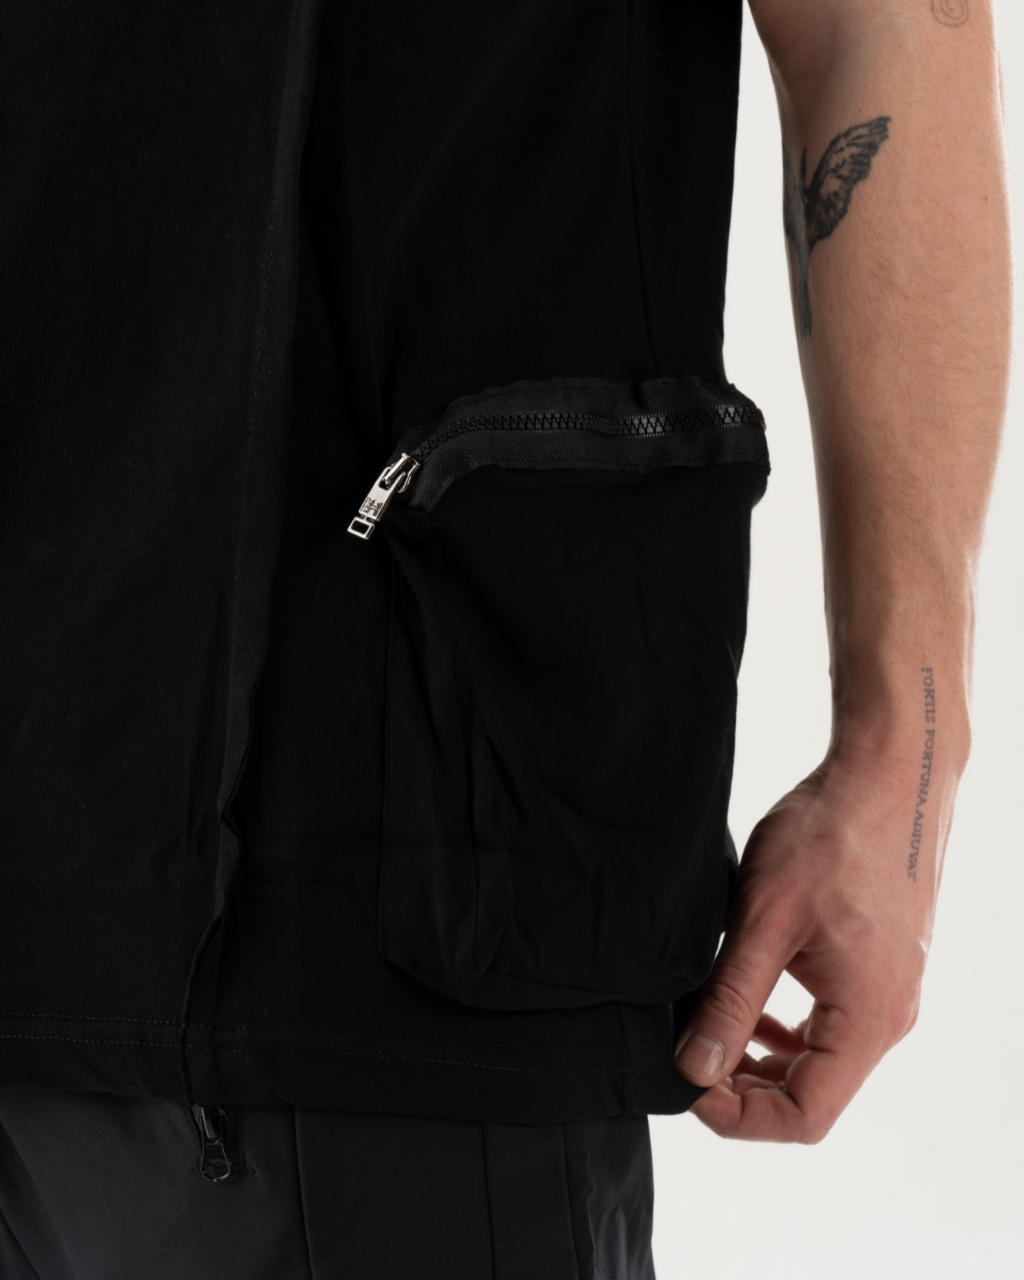 The back of a man wearing a BLACKFURY HOODIE with a zipper pocket in stylish hoodie.